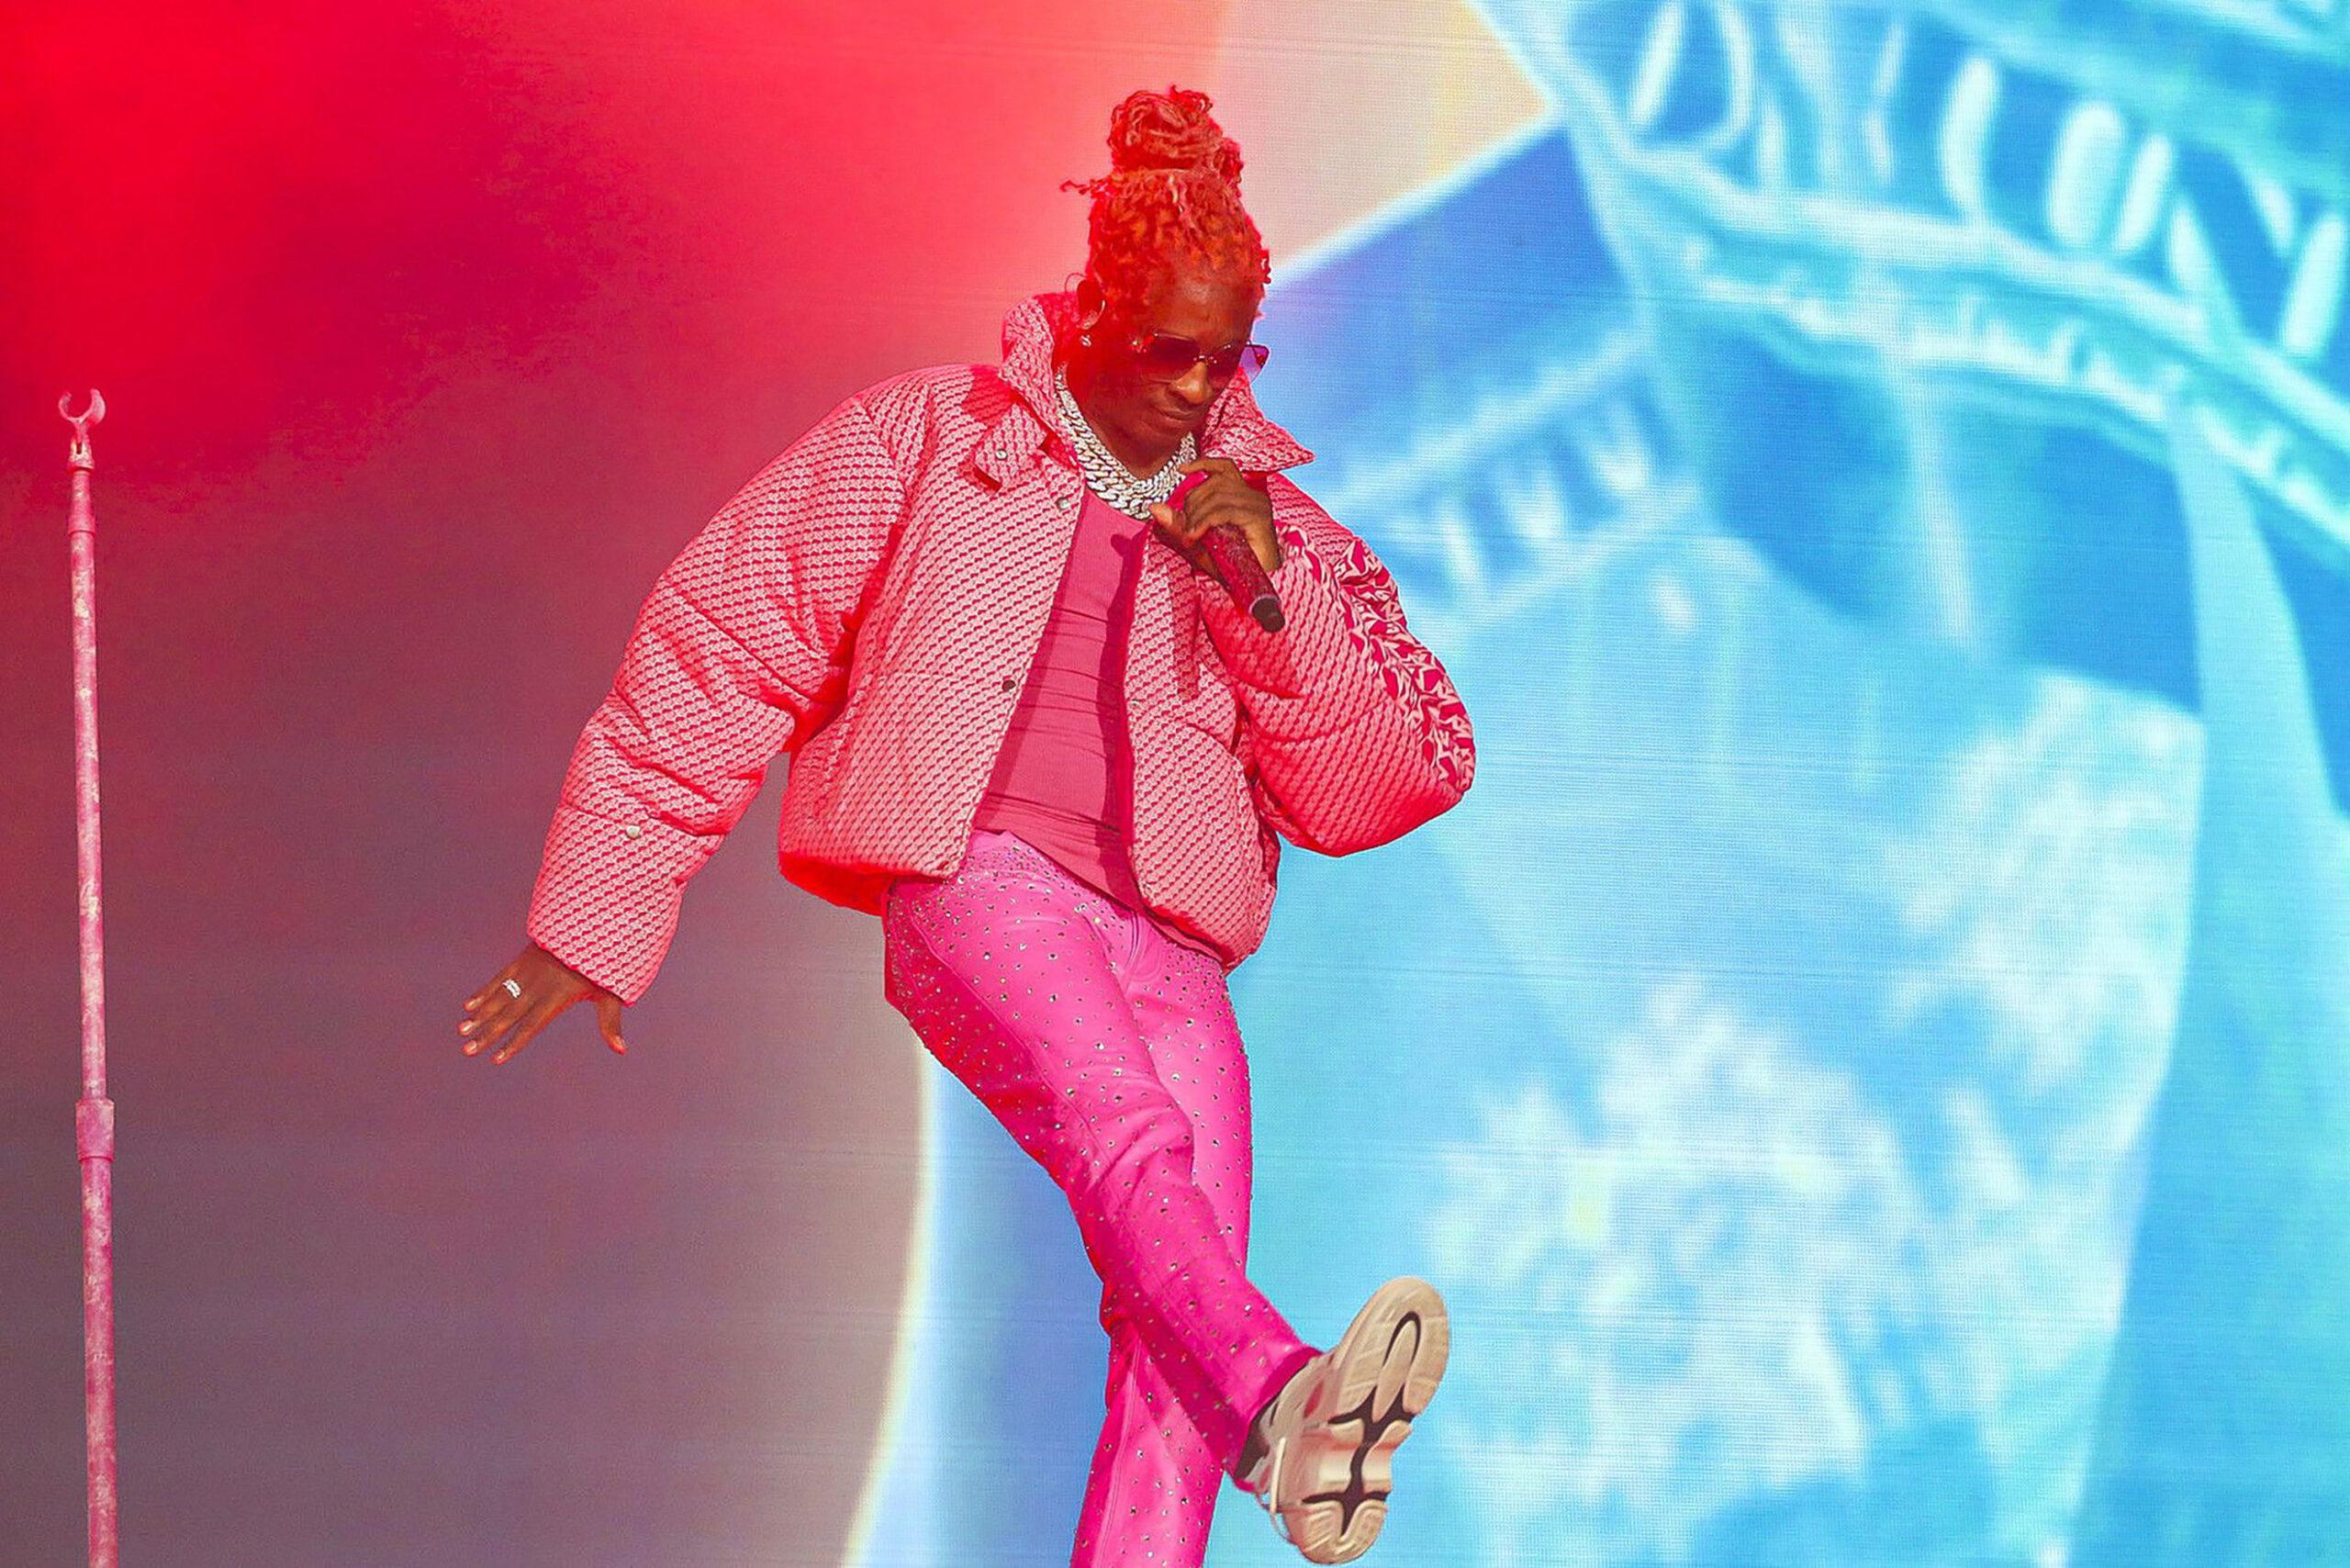 Young Thug performing at the Bud Light Seltzer stage